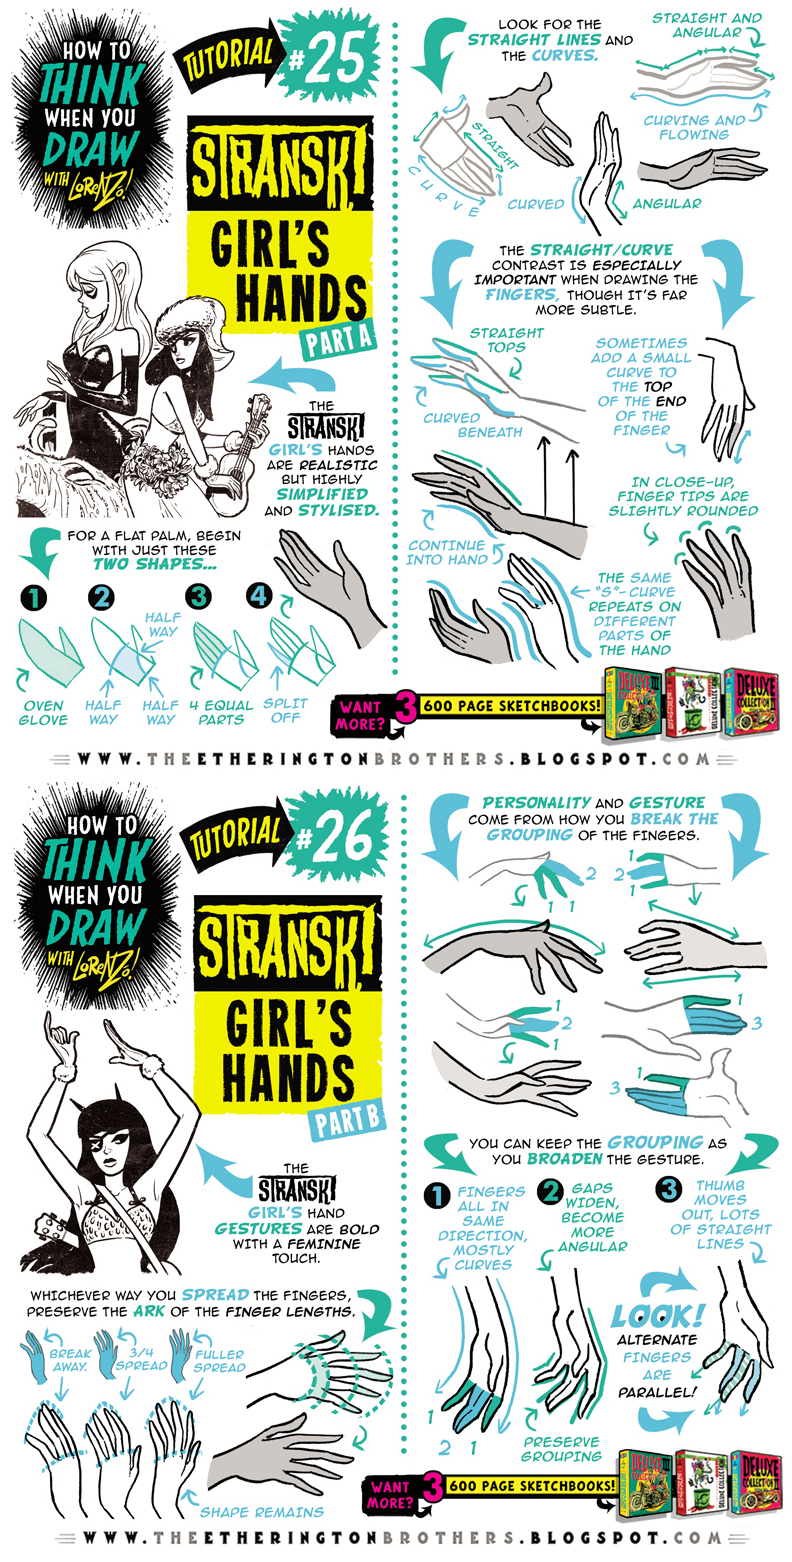 How to draw HANDS (parts 1 and 2) tutorial